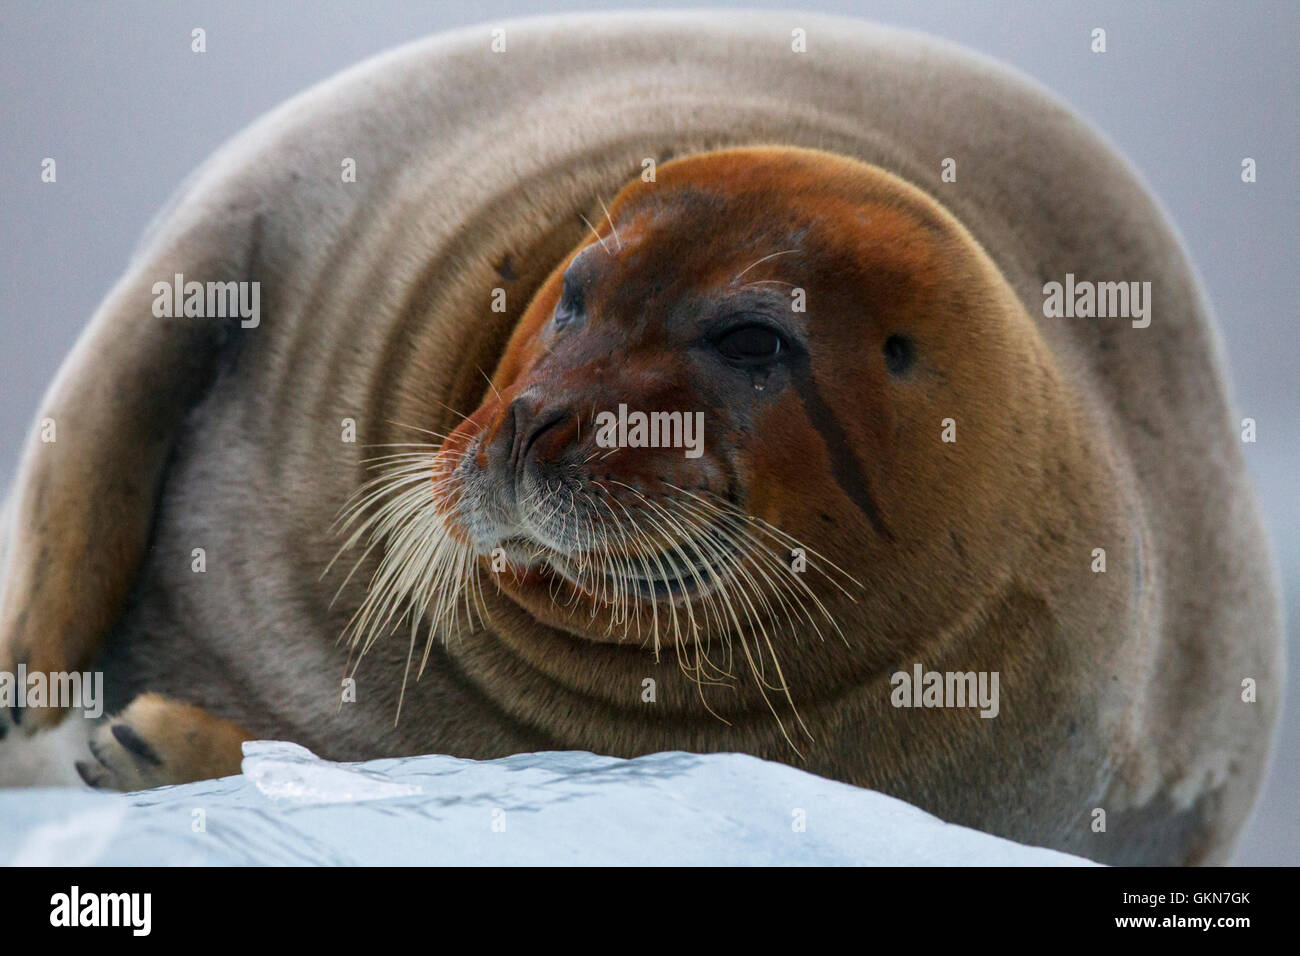 Bearded Seal on the ice at Kings Bay, Svalbard Stock Photo